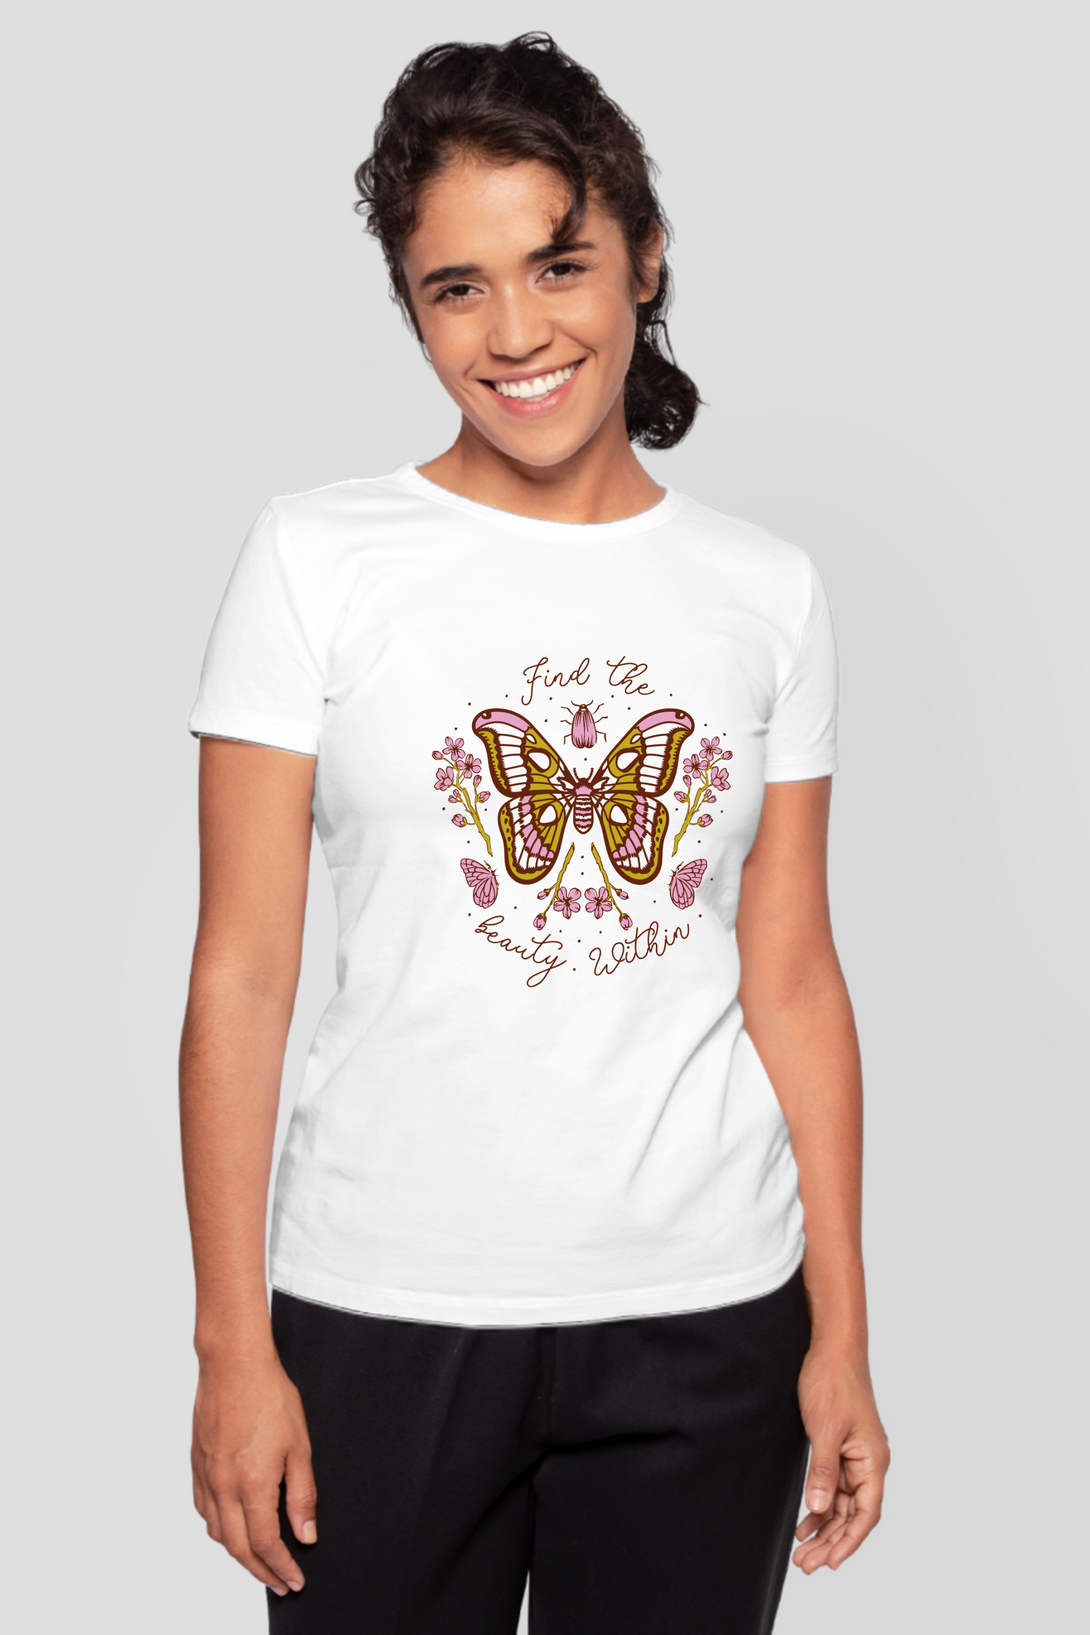 Find The Beauty Within Printed T-Shirt For Women - WowWaves - 8